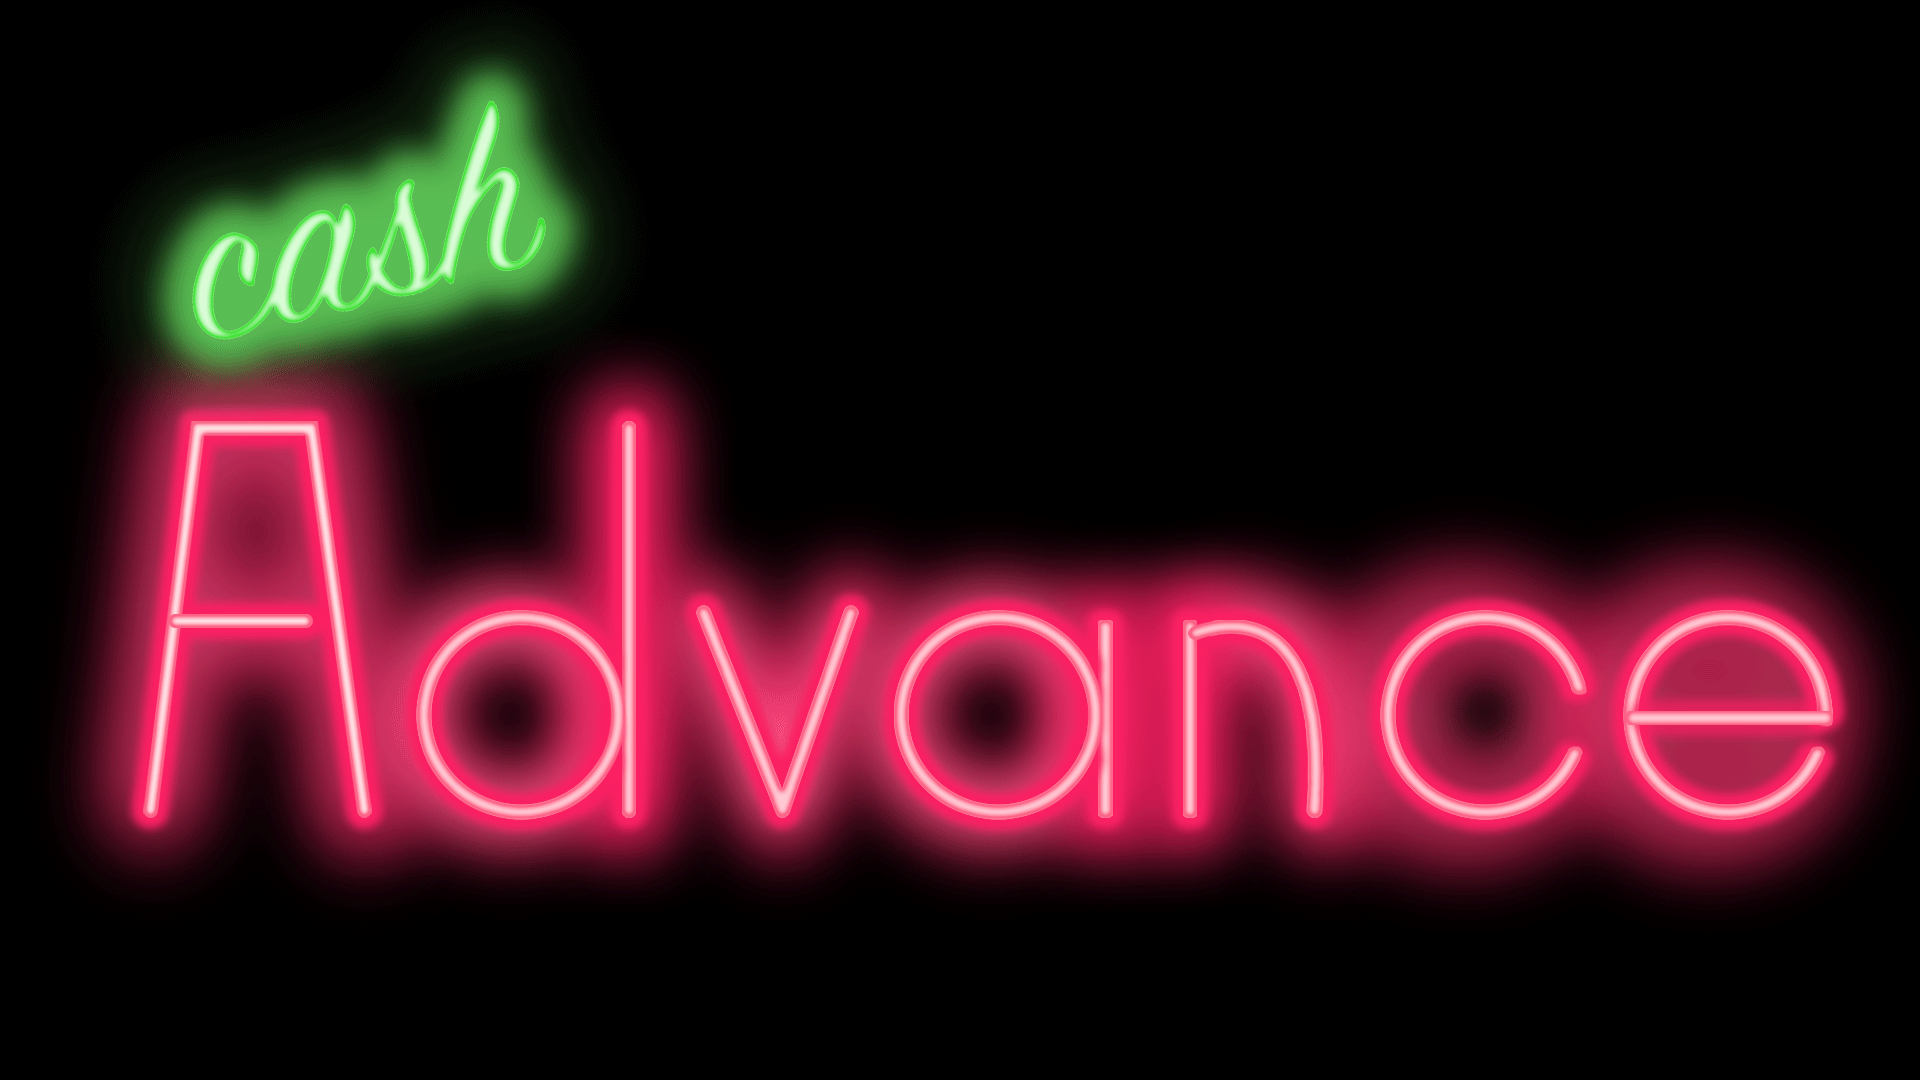 Animated GIF of a some of the letters in a neon sign that reads "Advance" turning off to read "loan"